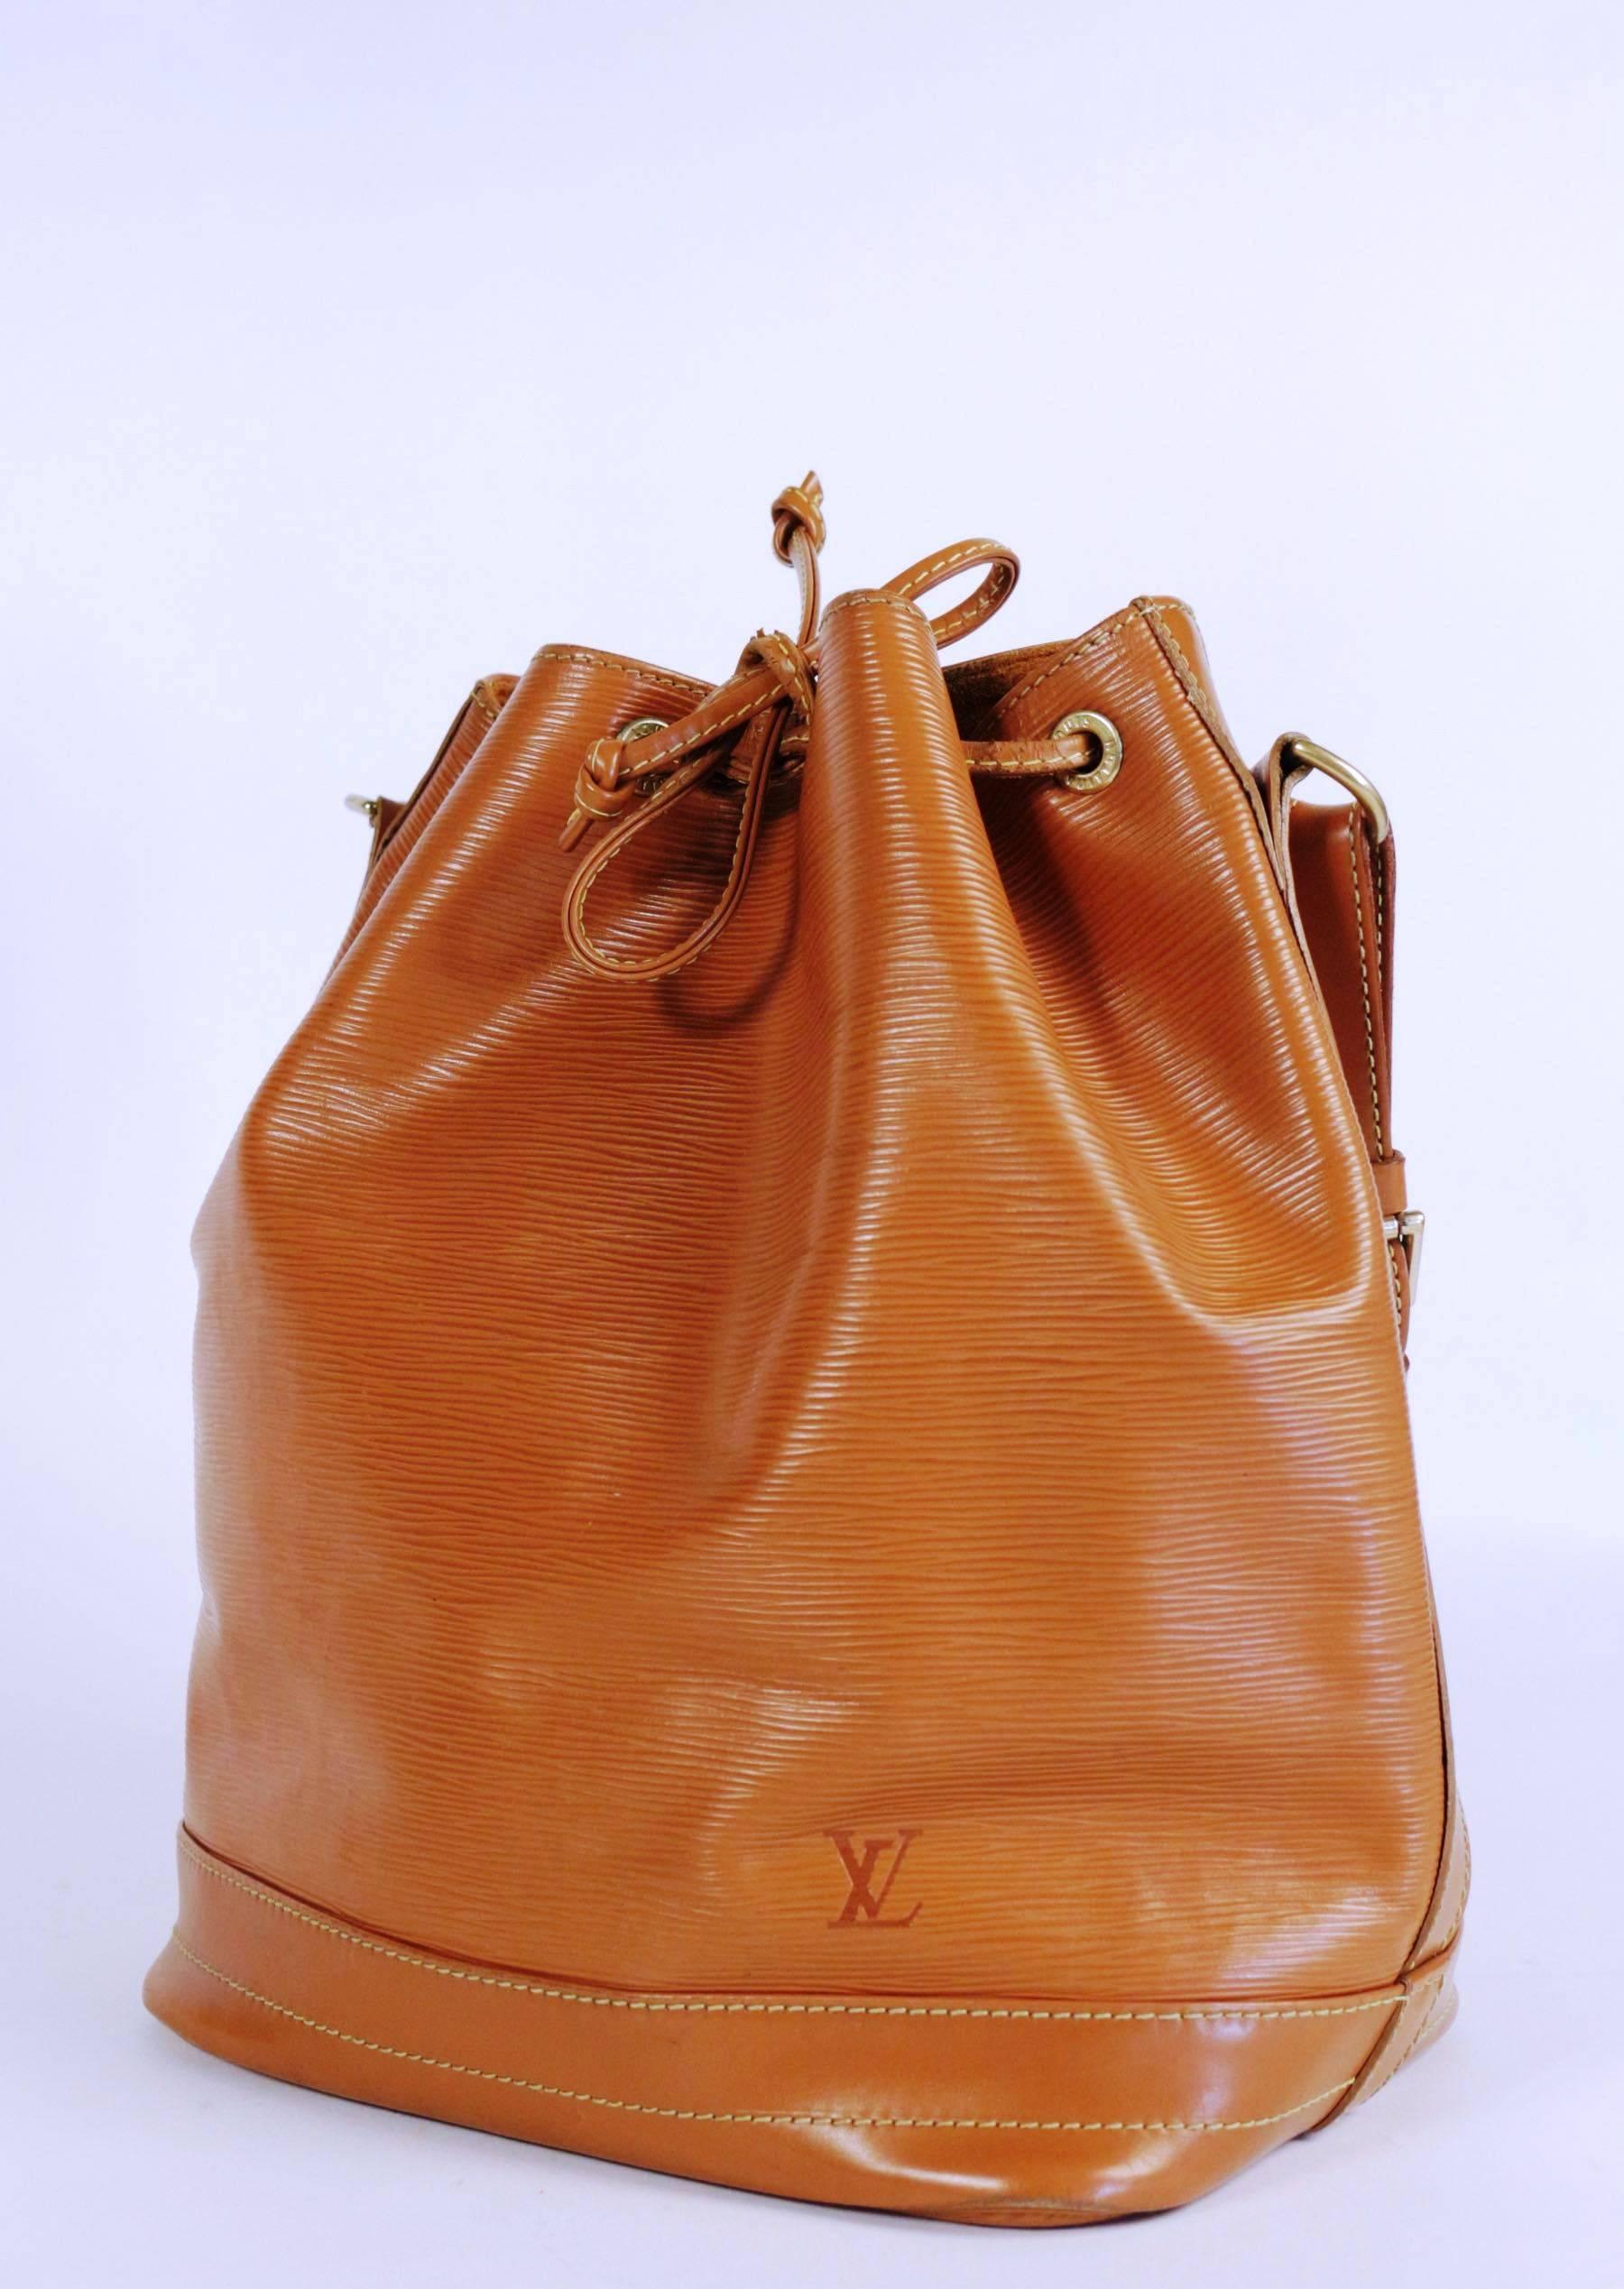 Vintage Louis Vuitton Grand Noe bag, epi leather, natural leather color, 
created in 1932. Adjustable leather strap.